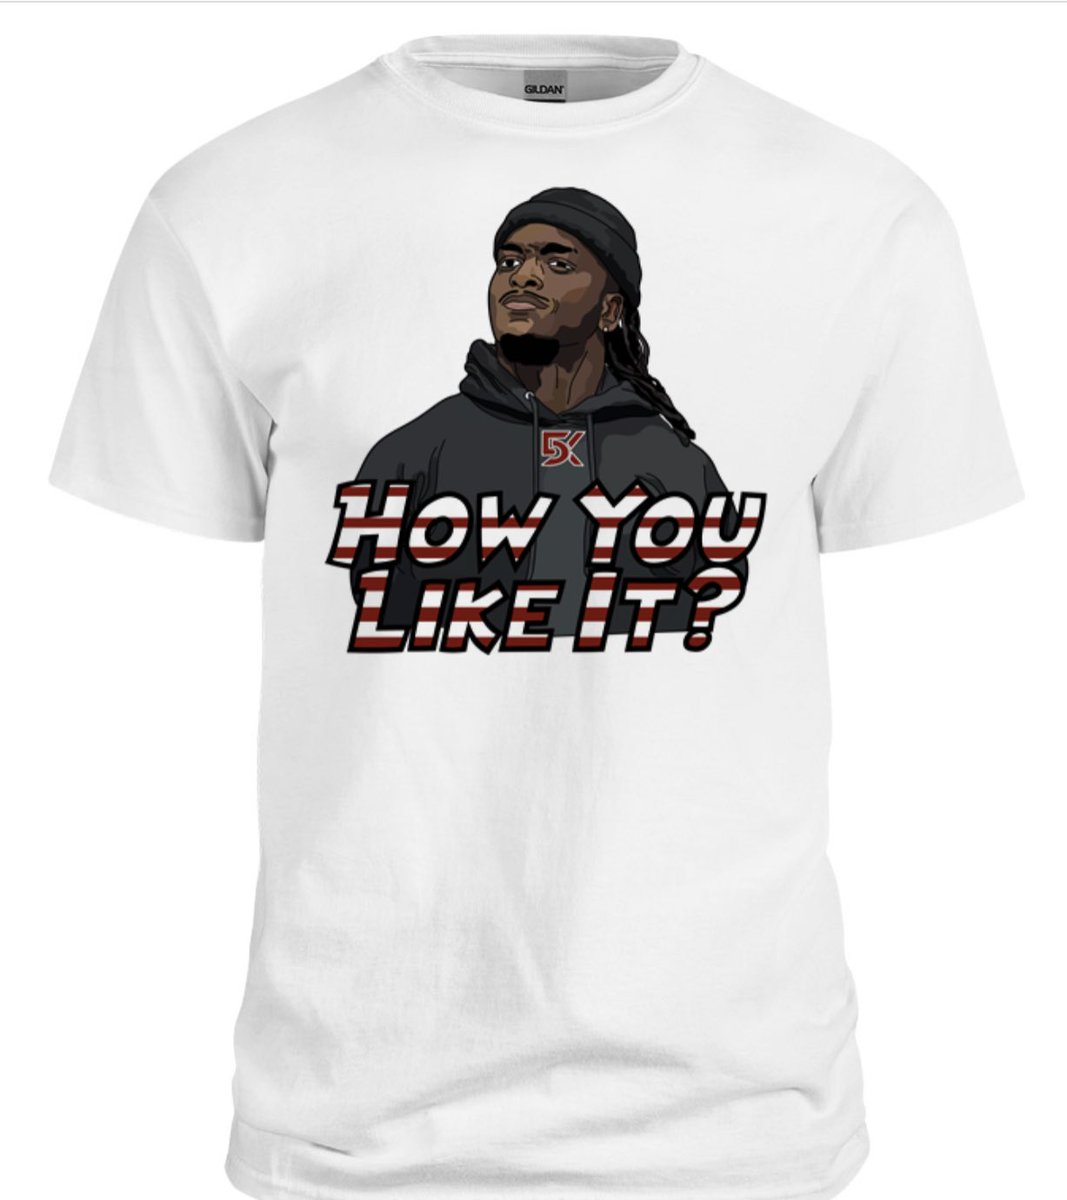 After a interesting week, my DK5 team and I thought this would be a great idea 😂 The DK5, “How you like it? 😉” shirts now available! cantstopcinco.com/products/how-d…  

Thank you to @GamecockArt for the graphic!!!